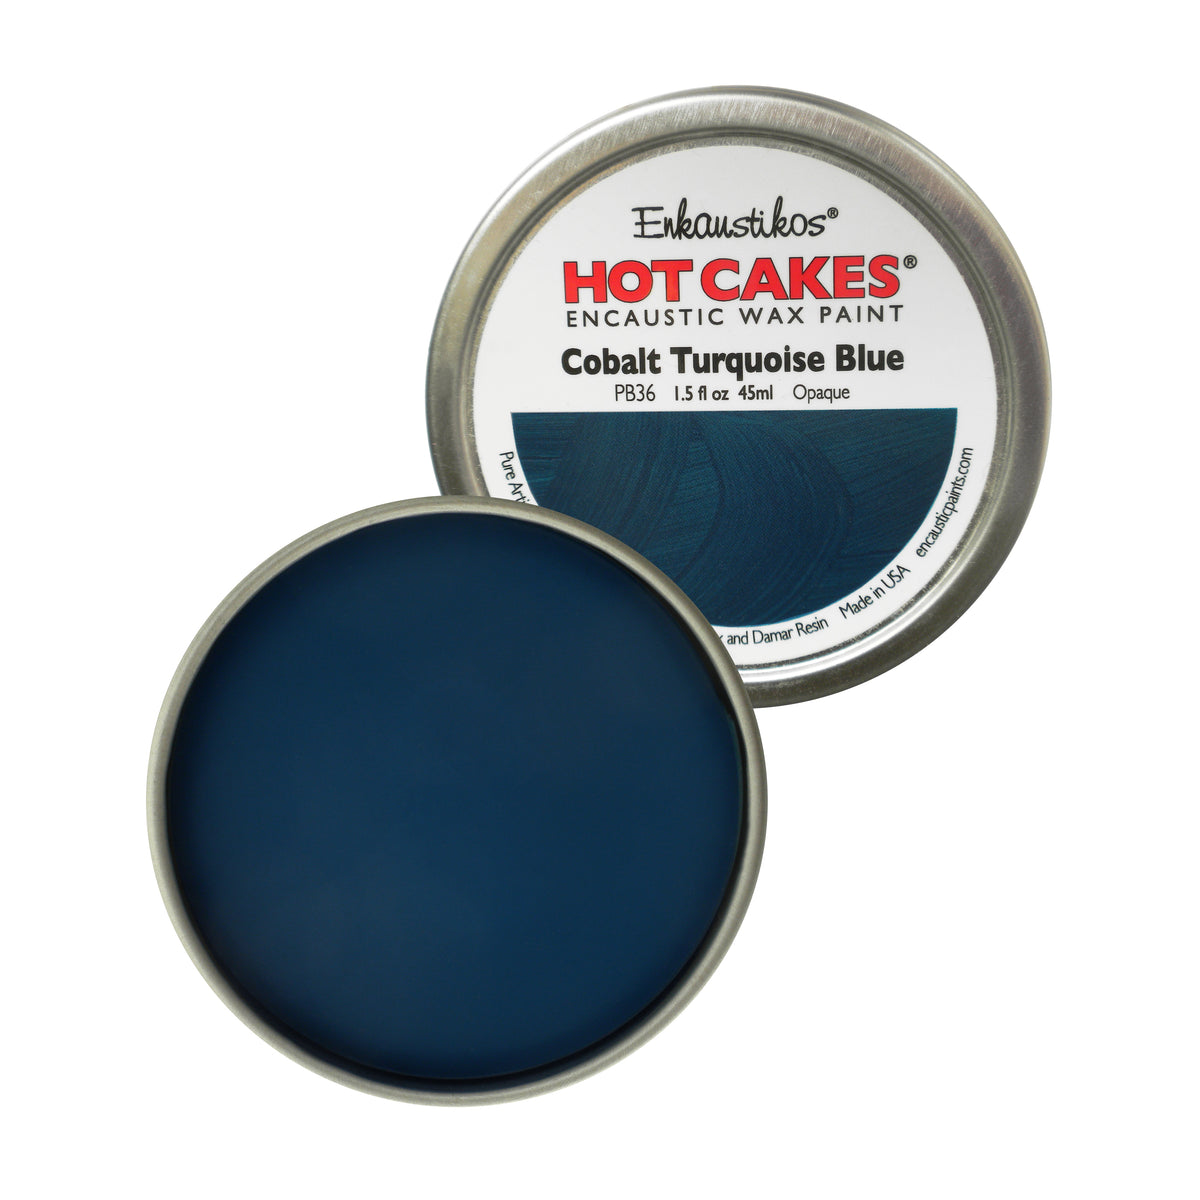 Cobalt Turquoise Blue Hot Cakes